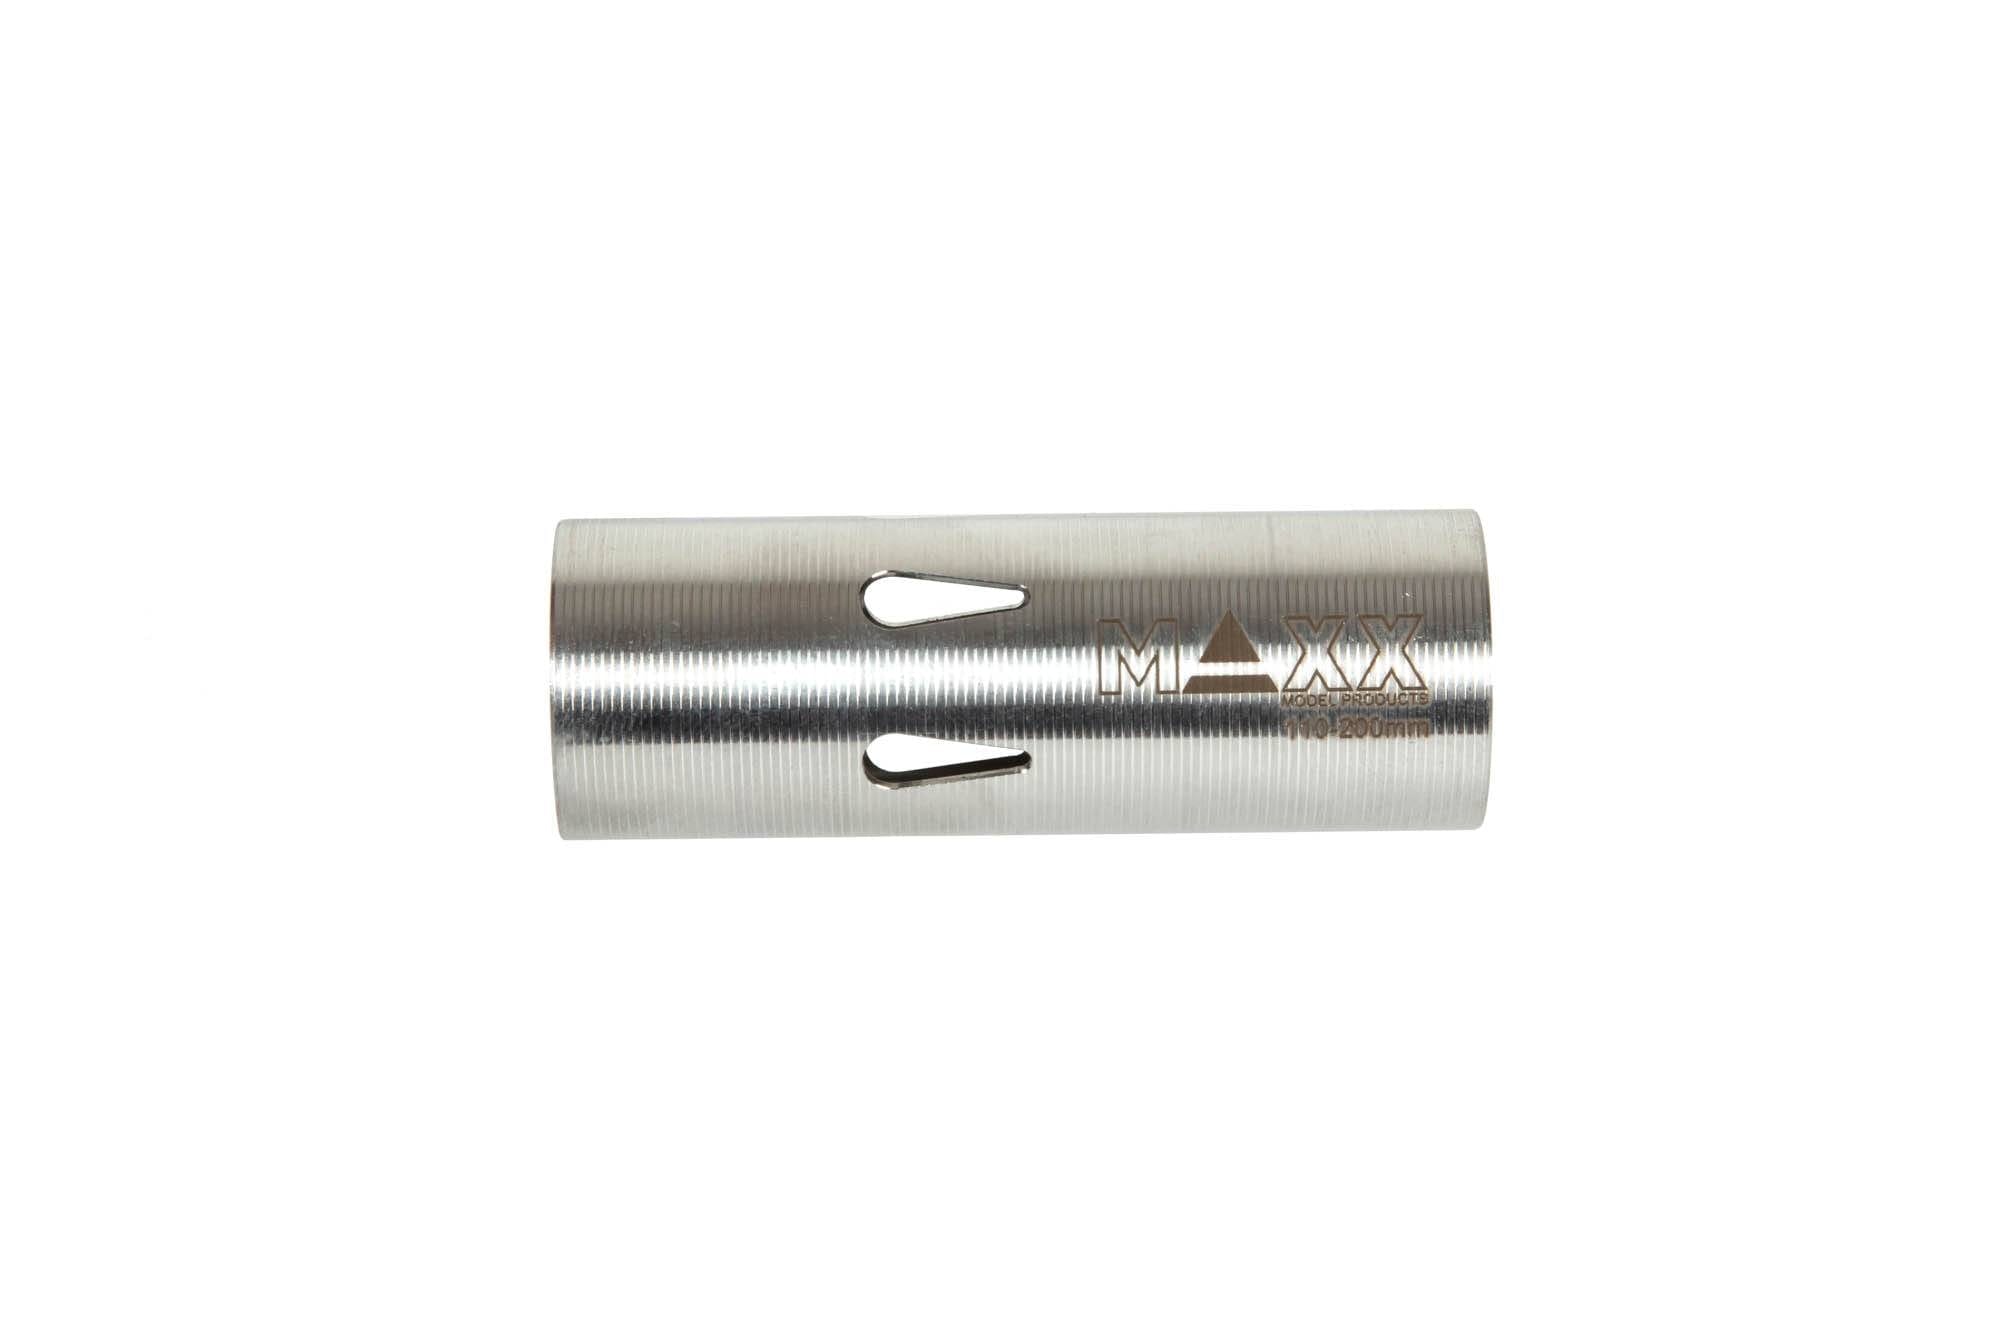 Hardened Stainless Steel Cylinder - Type E (200 - 250mm)